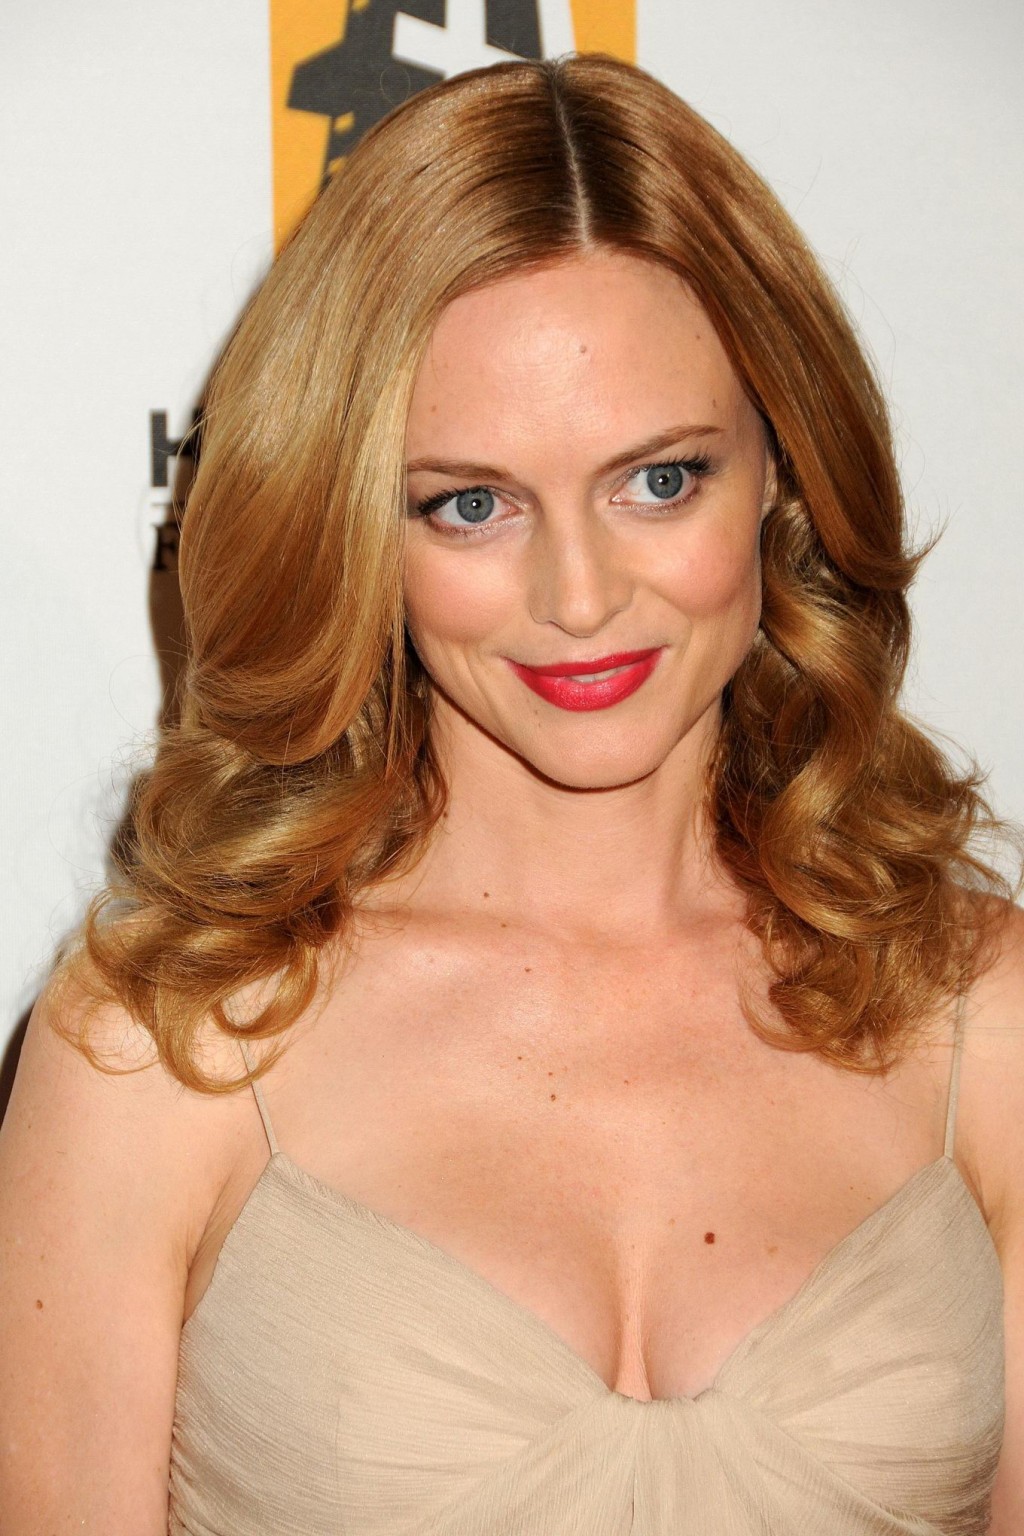 Heather Graham braless showing nice cleavage at 'Hollywood Awards' 14th Annual G #75328708